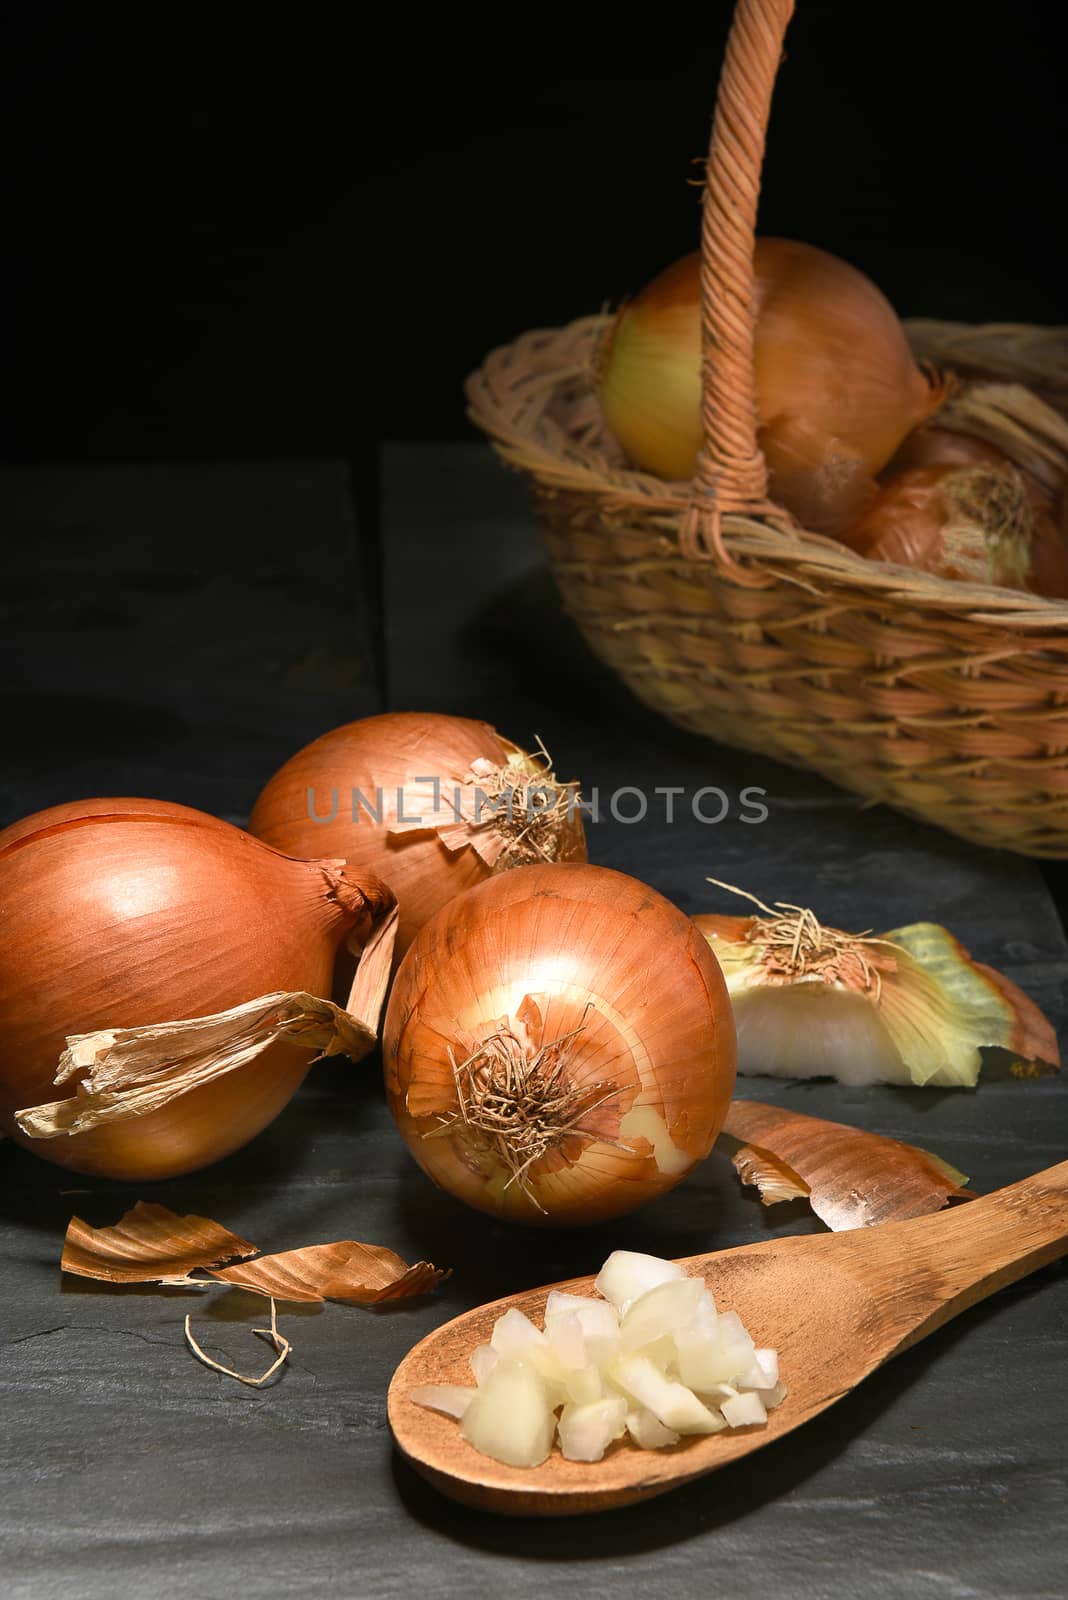 Closeup of a group of yellow onions on a dark slate surface. Vertical format with copy space.